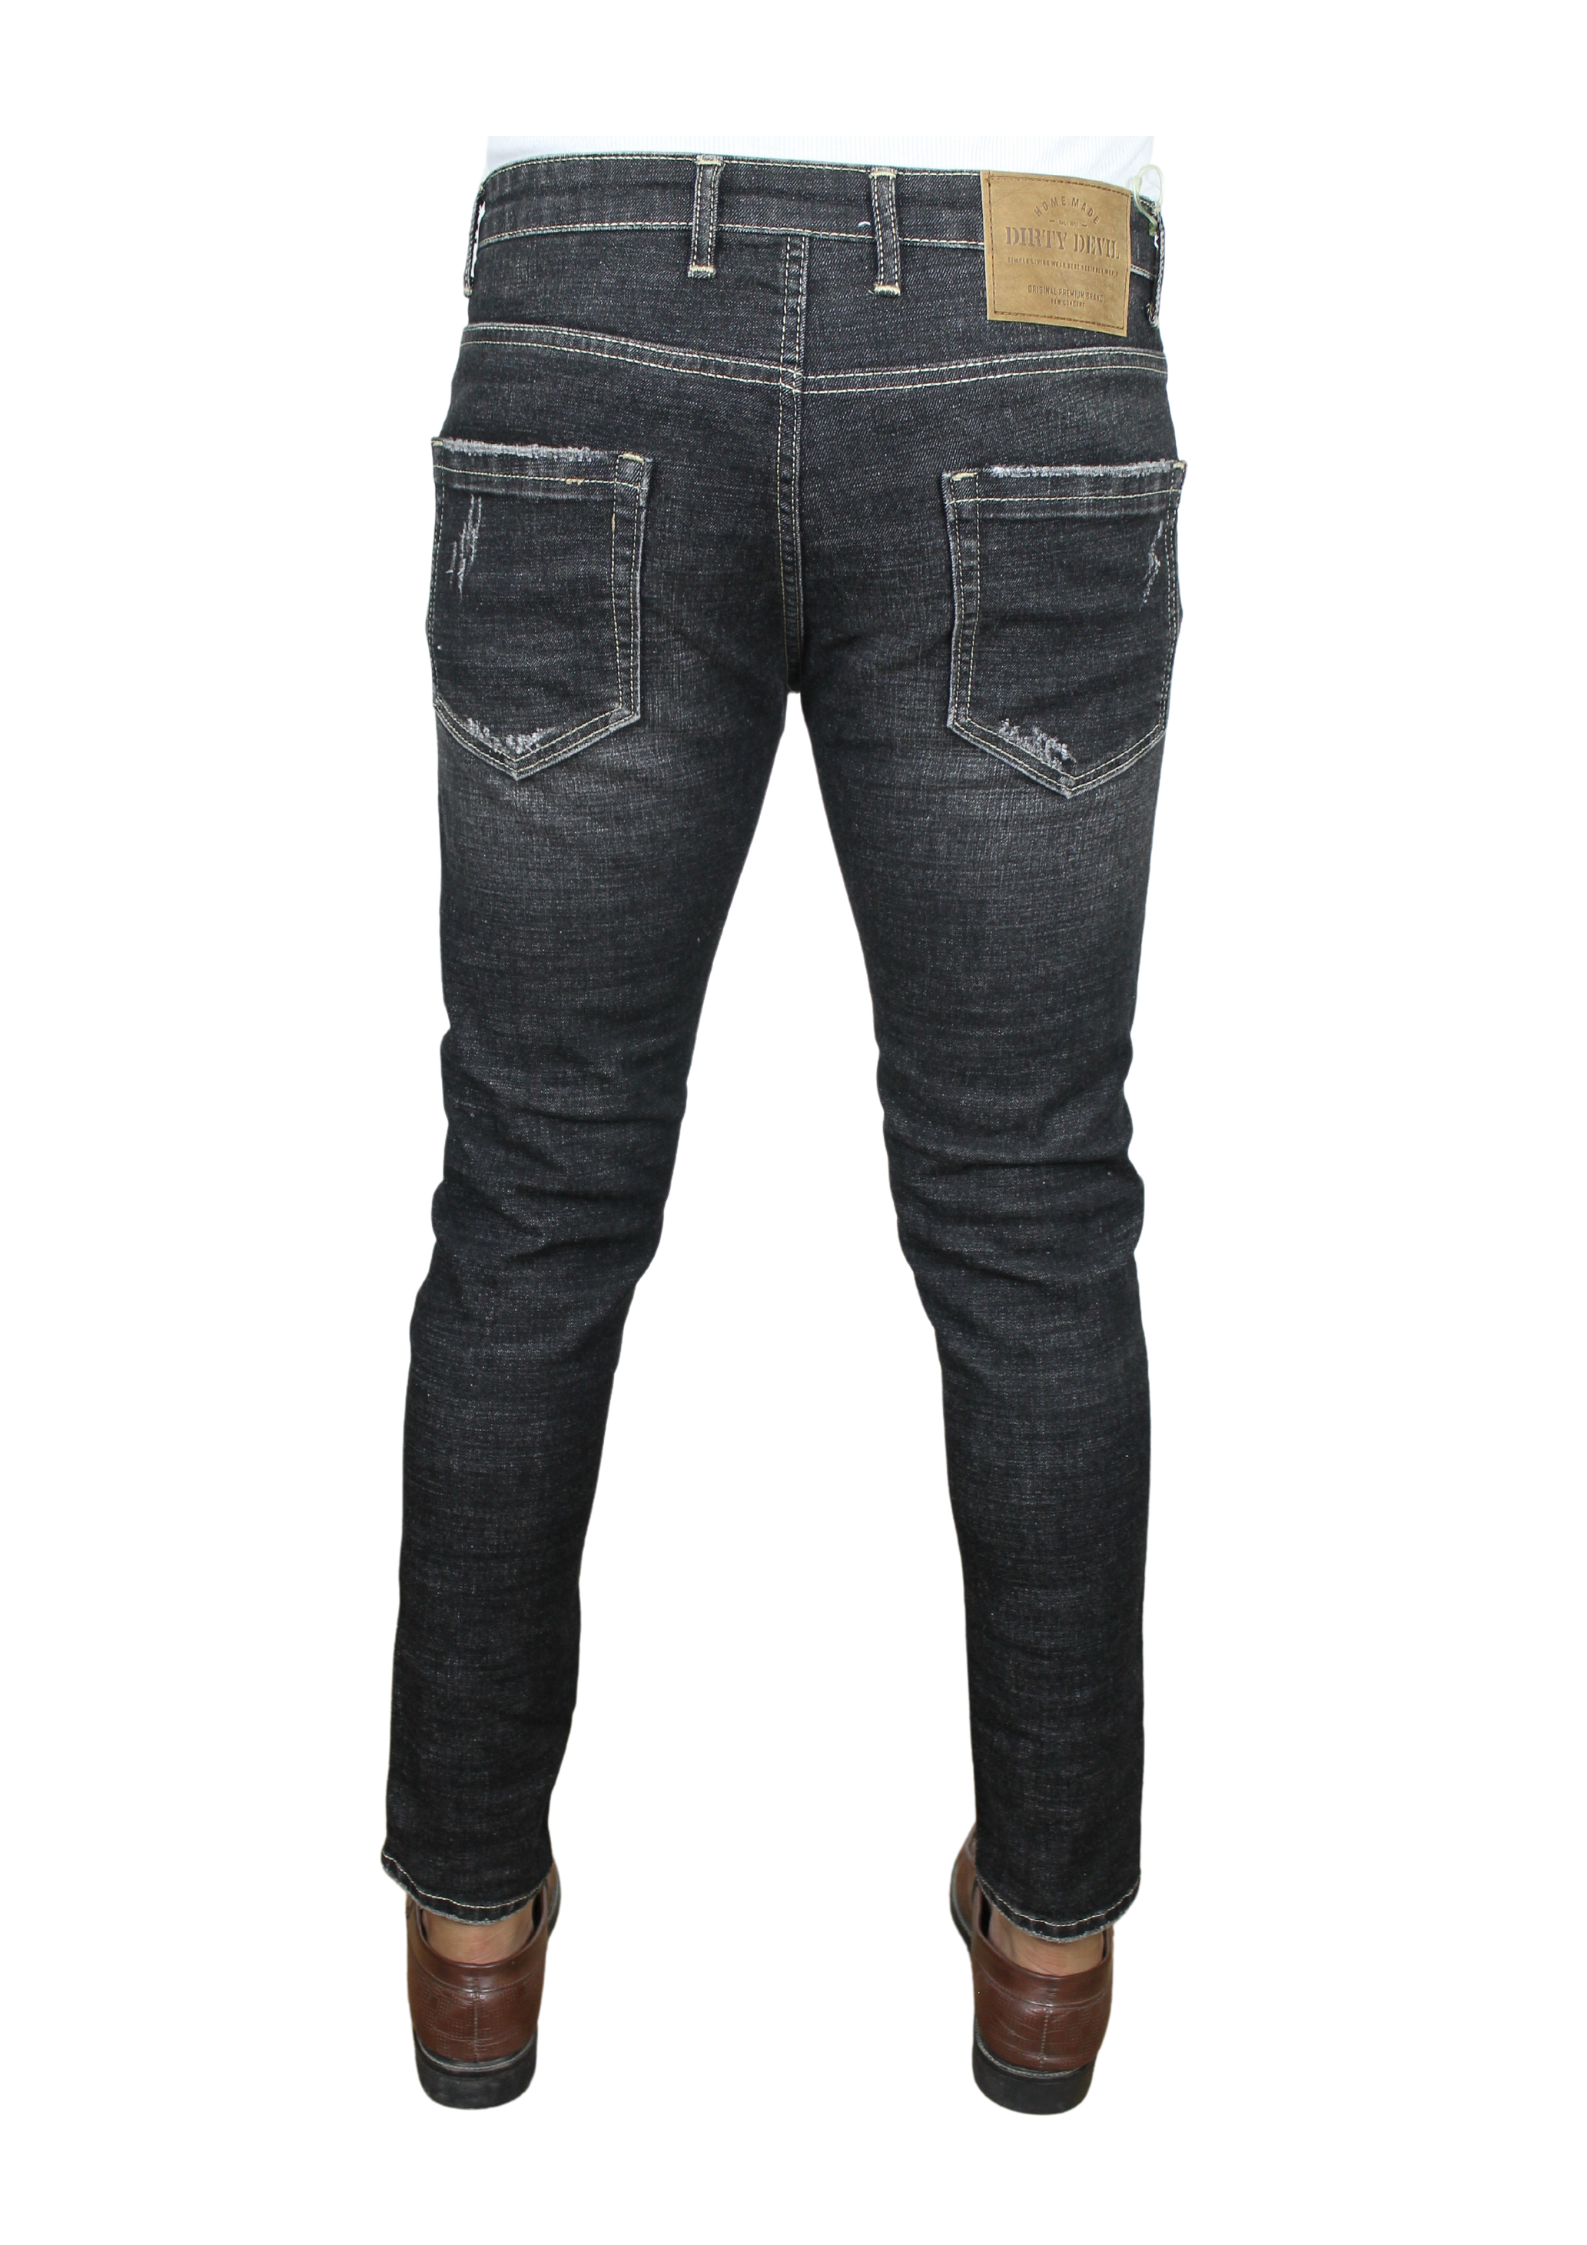 Smooth Charcoel Gray Light Ankle Fit Funky Denim Jeans